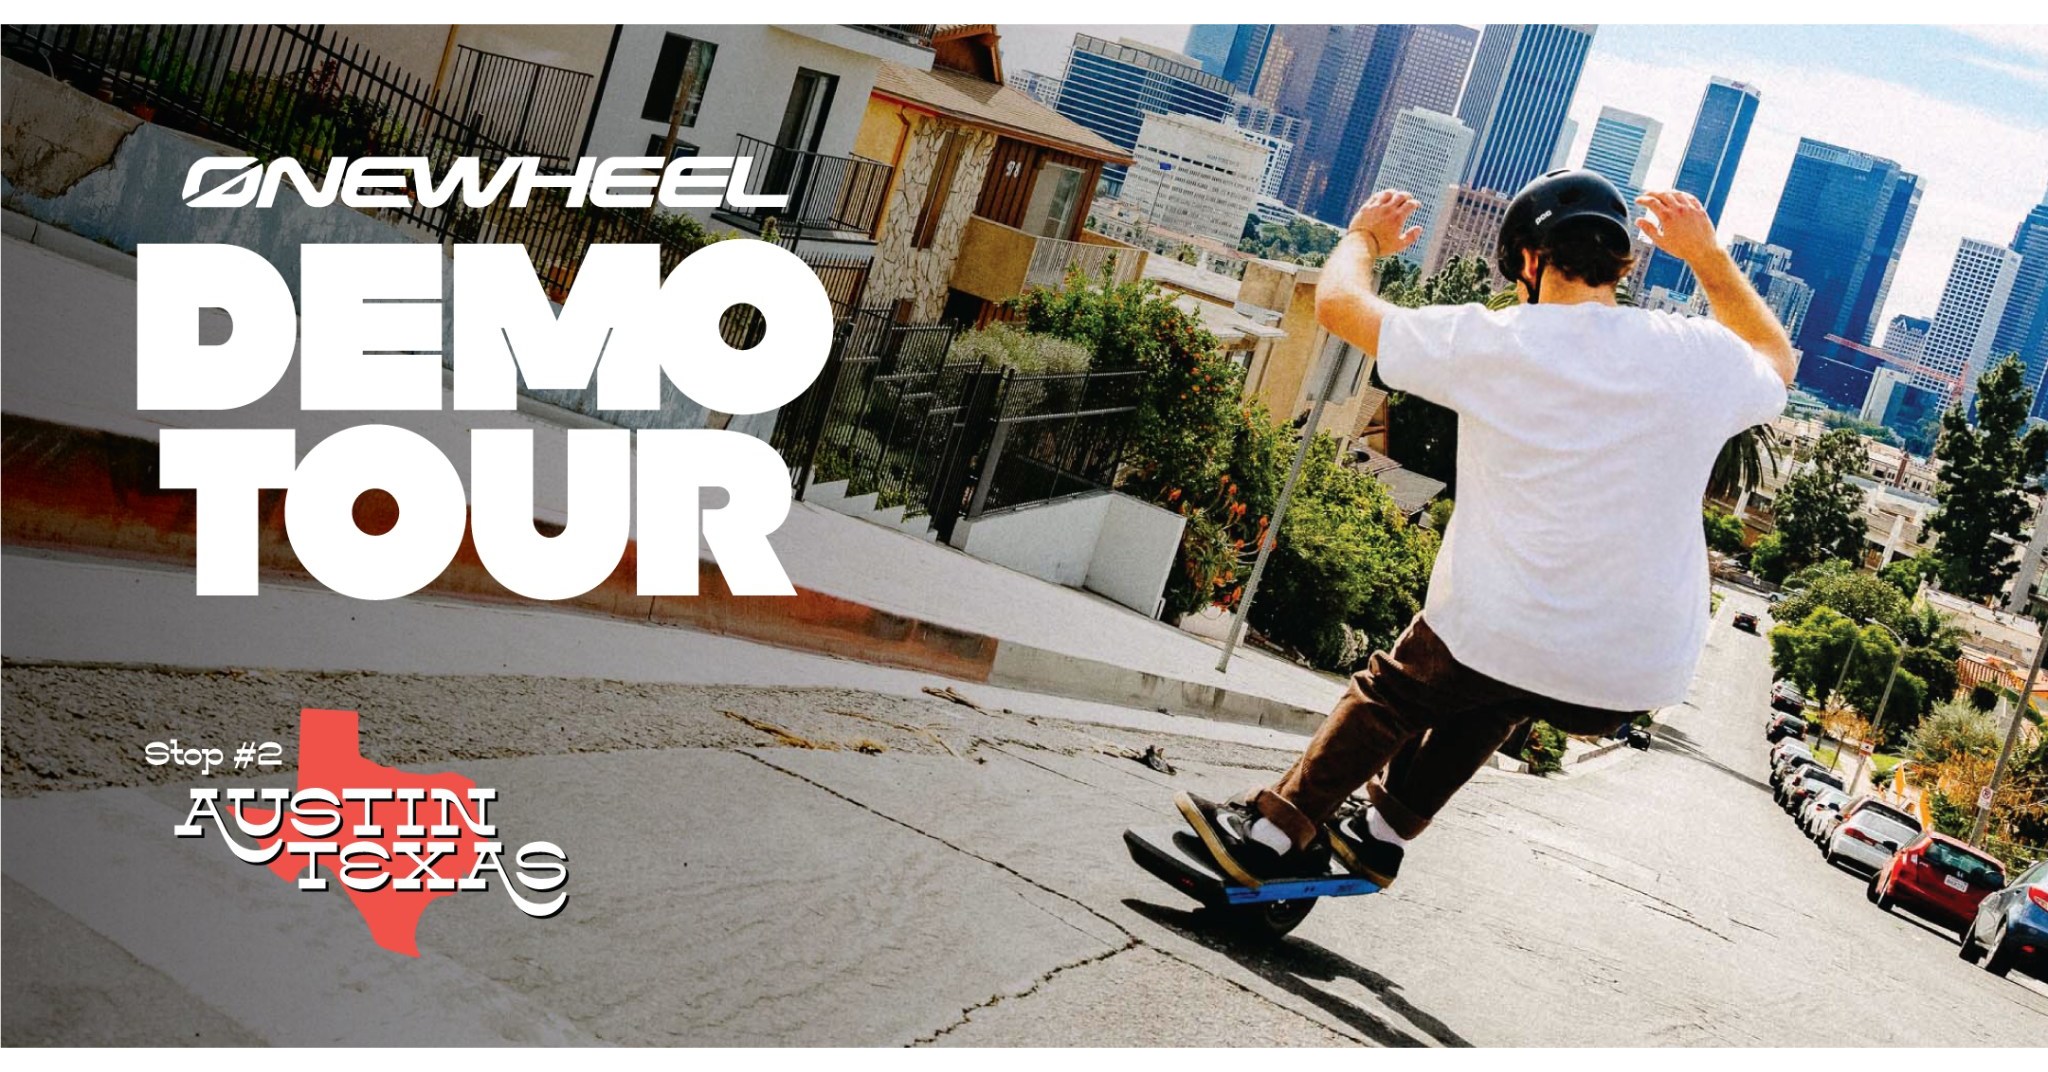 Onewheel Continues National Demo Tour with Next Stop in Austin, TX.